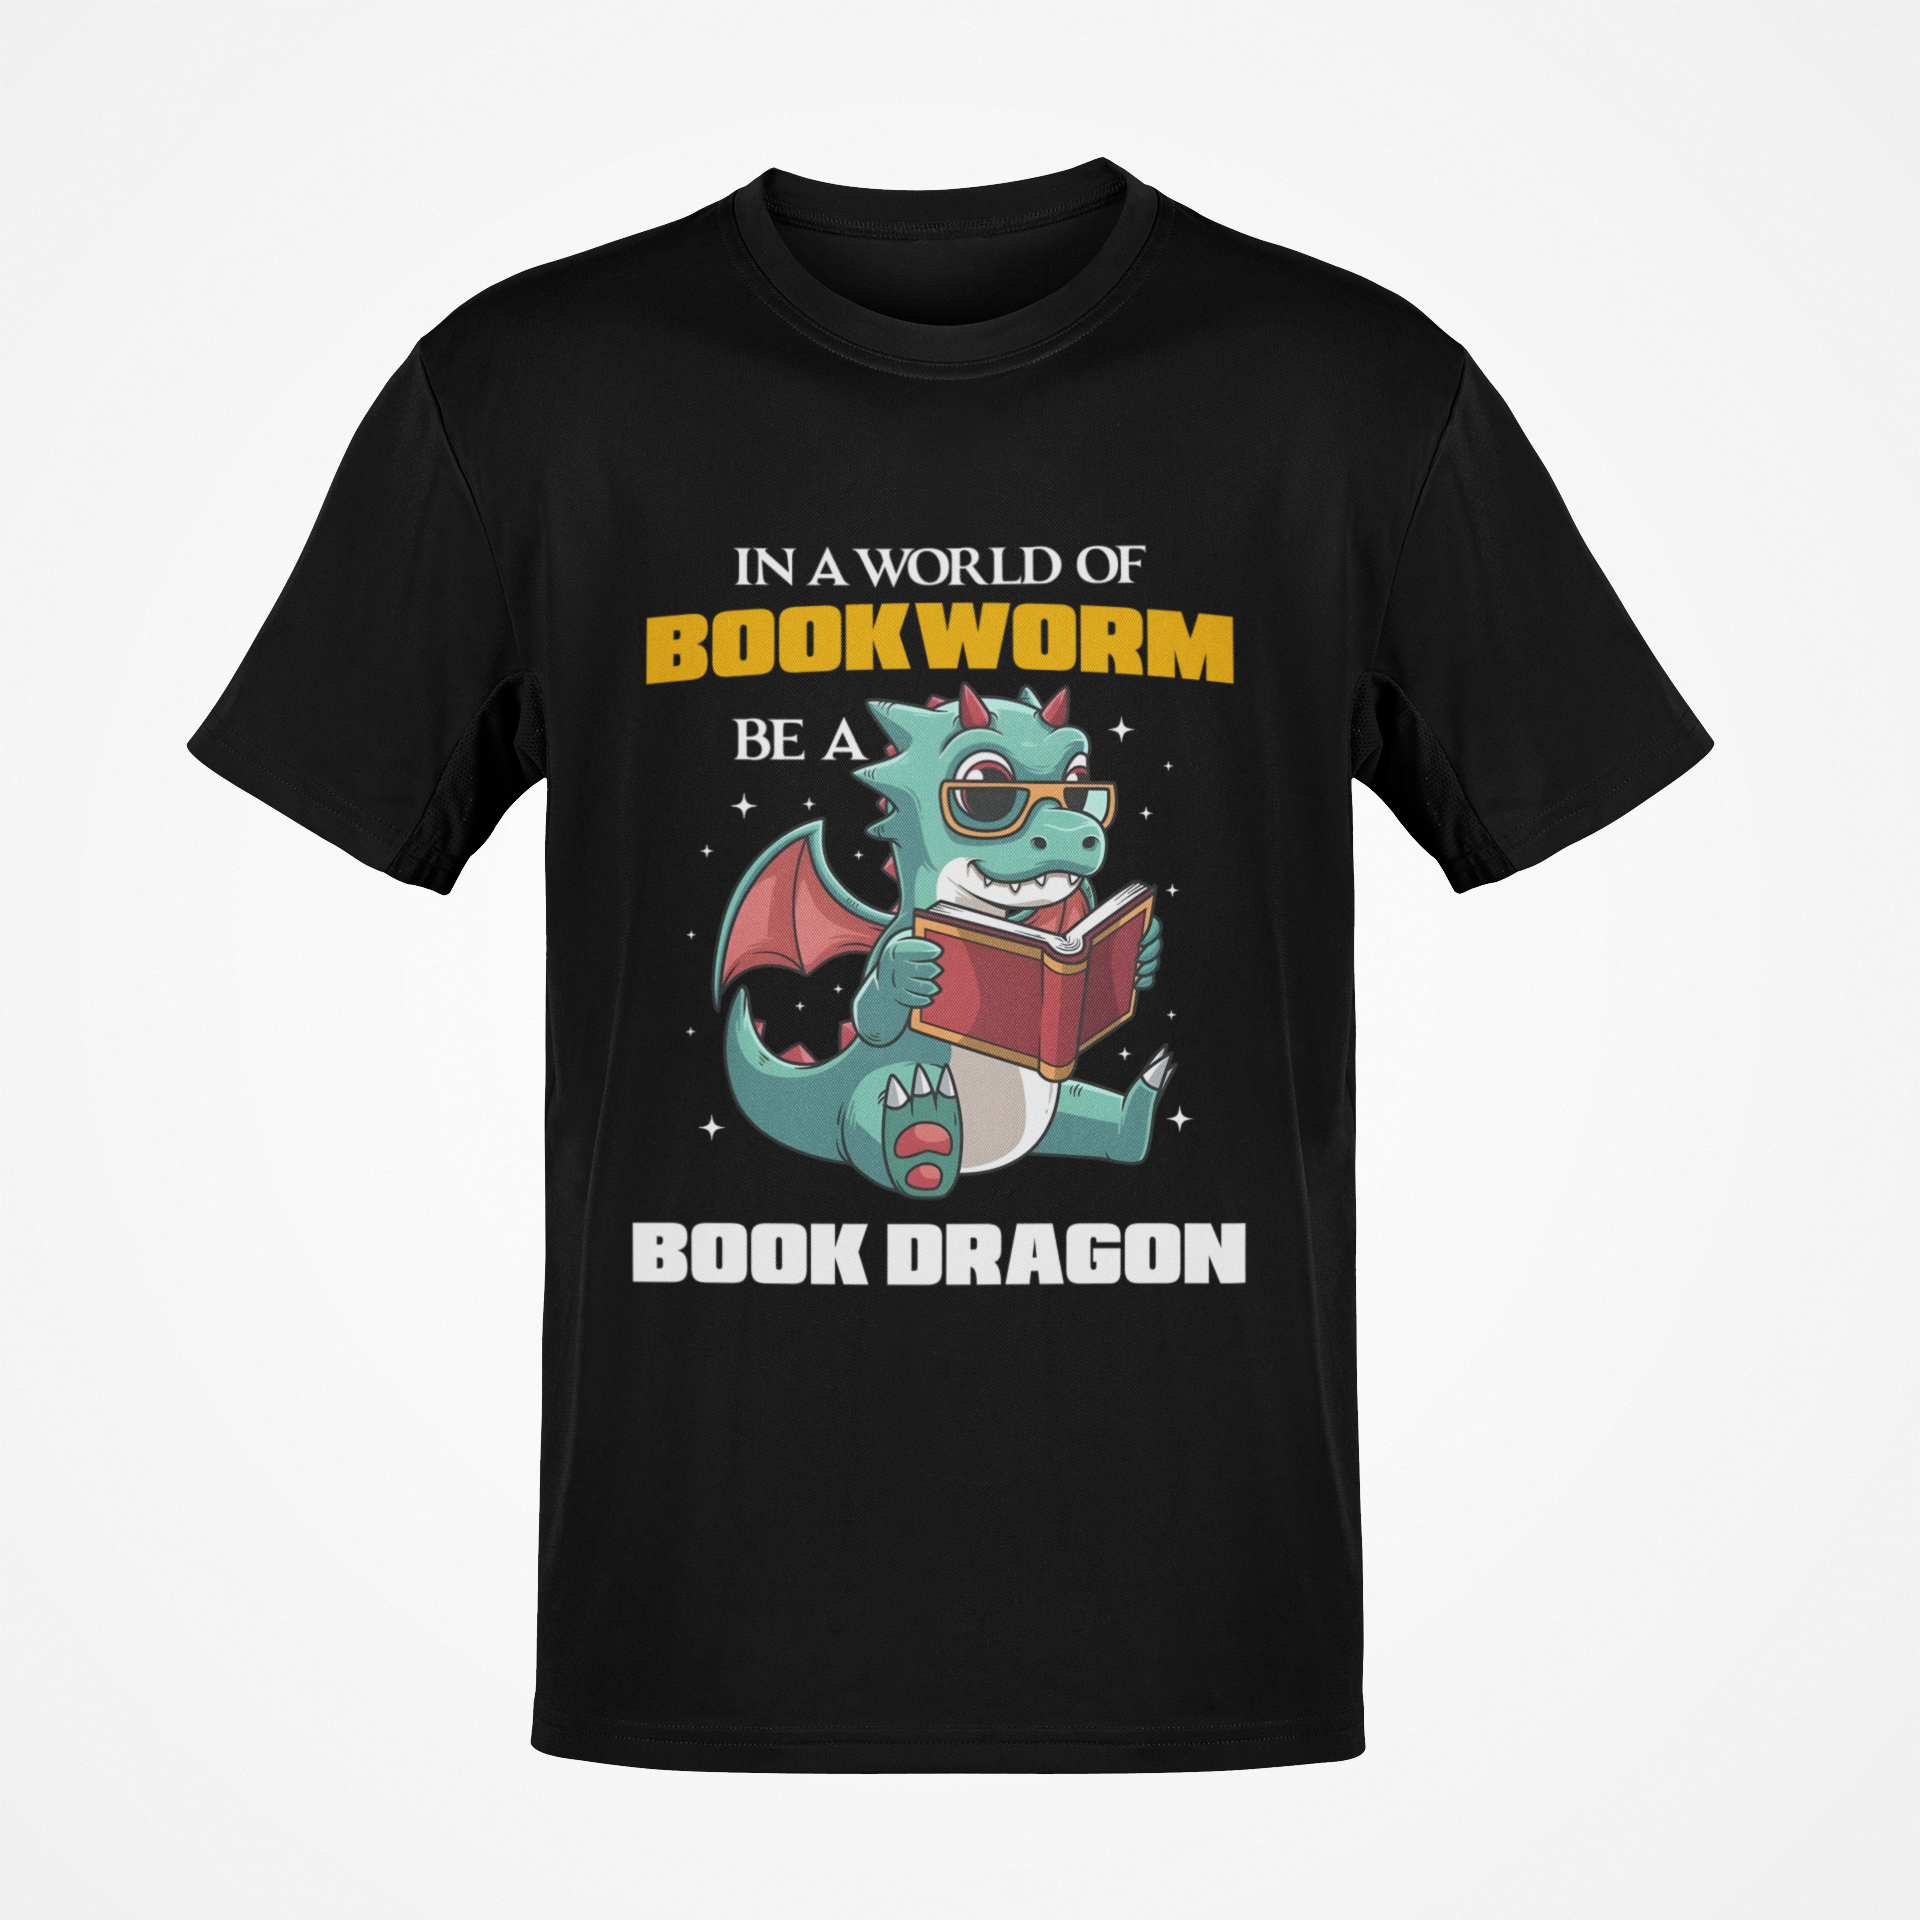 In A World of Bookworm, Be A Book Dragon T-shirt